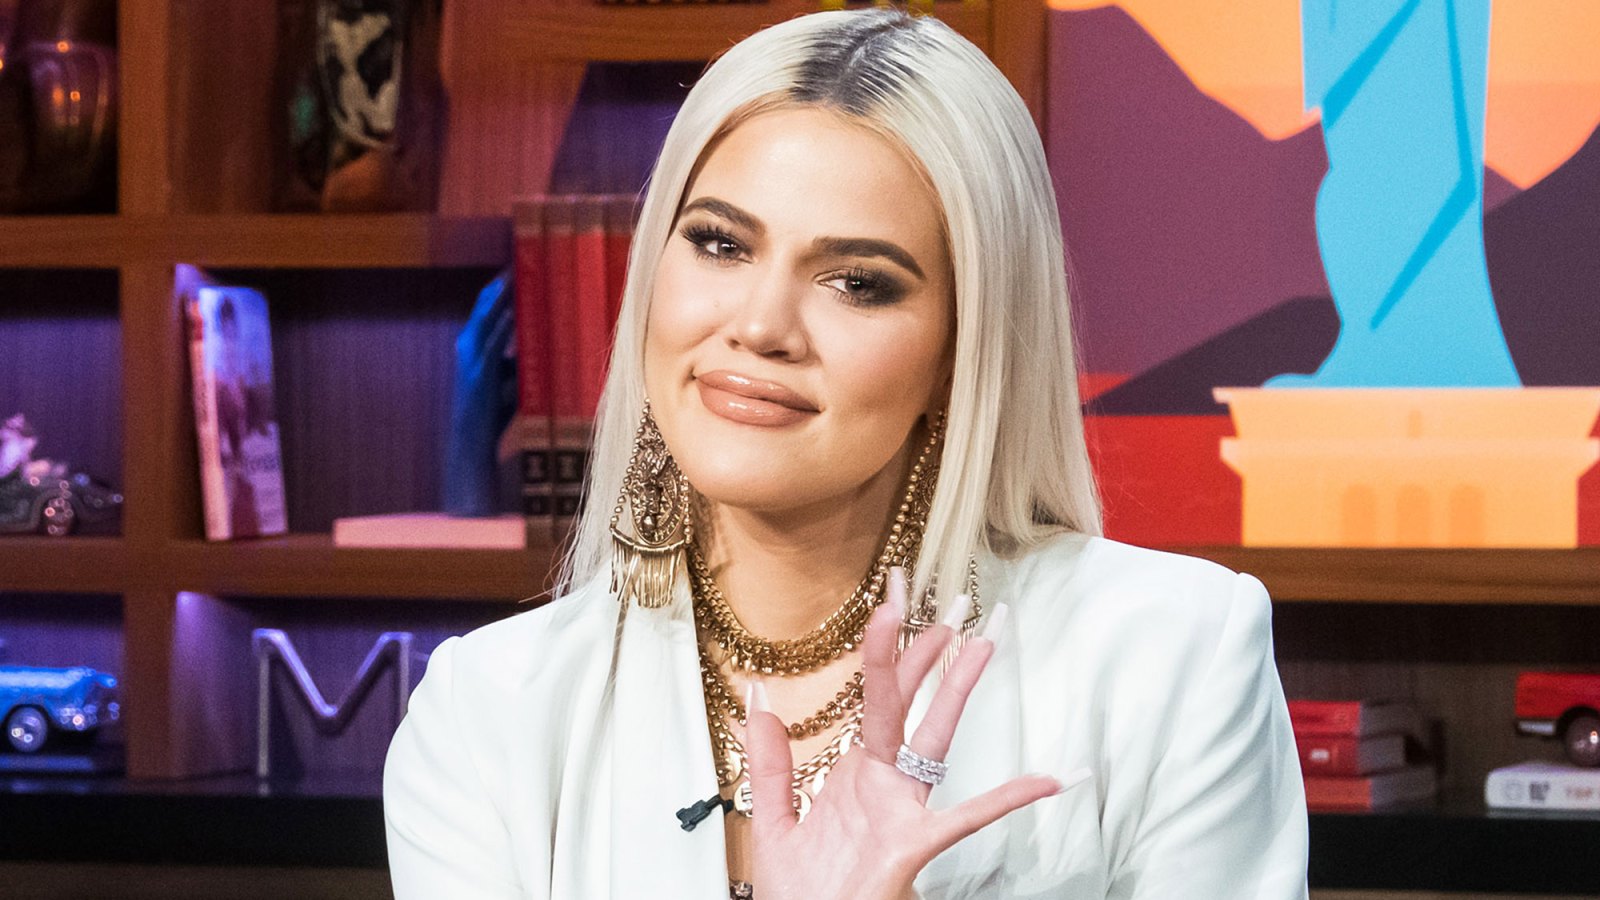 Khloe Kardashian Sent One Fan a Box of Good American Clothes When She Tweeted She Couldn't Afford to Buy Them Herself